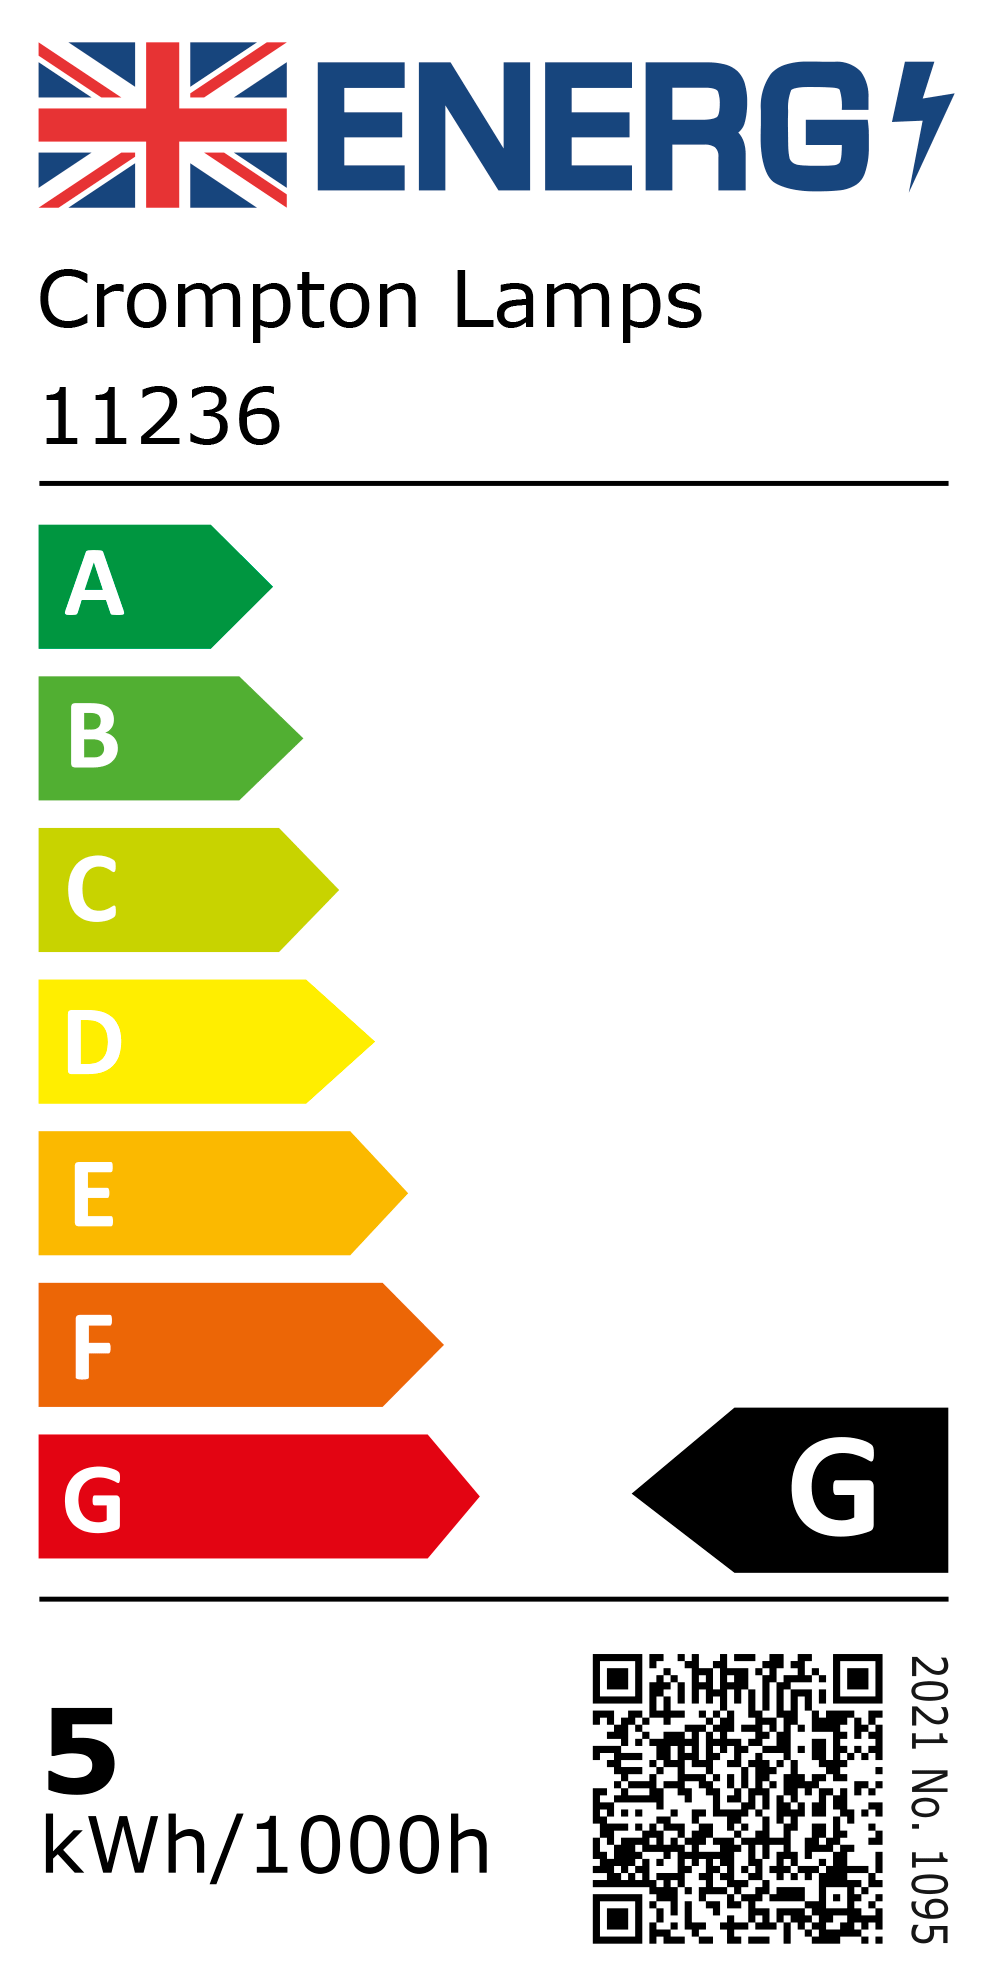 New 2021 Energy Rating Label: Stock Code 11236